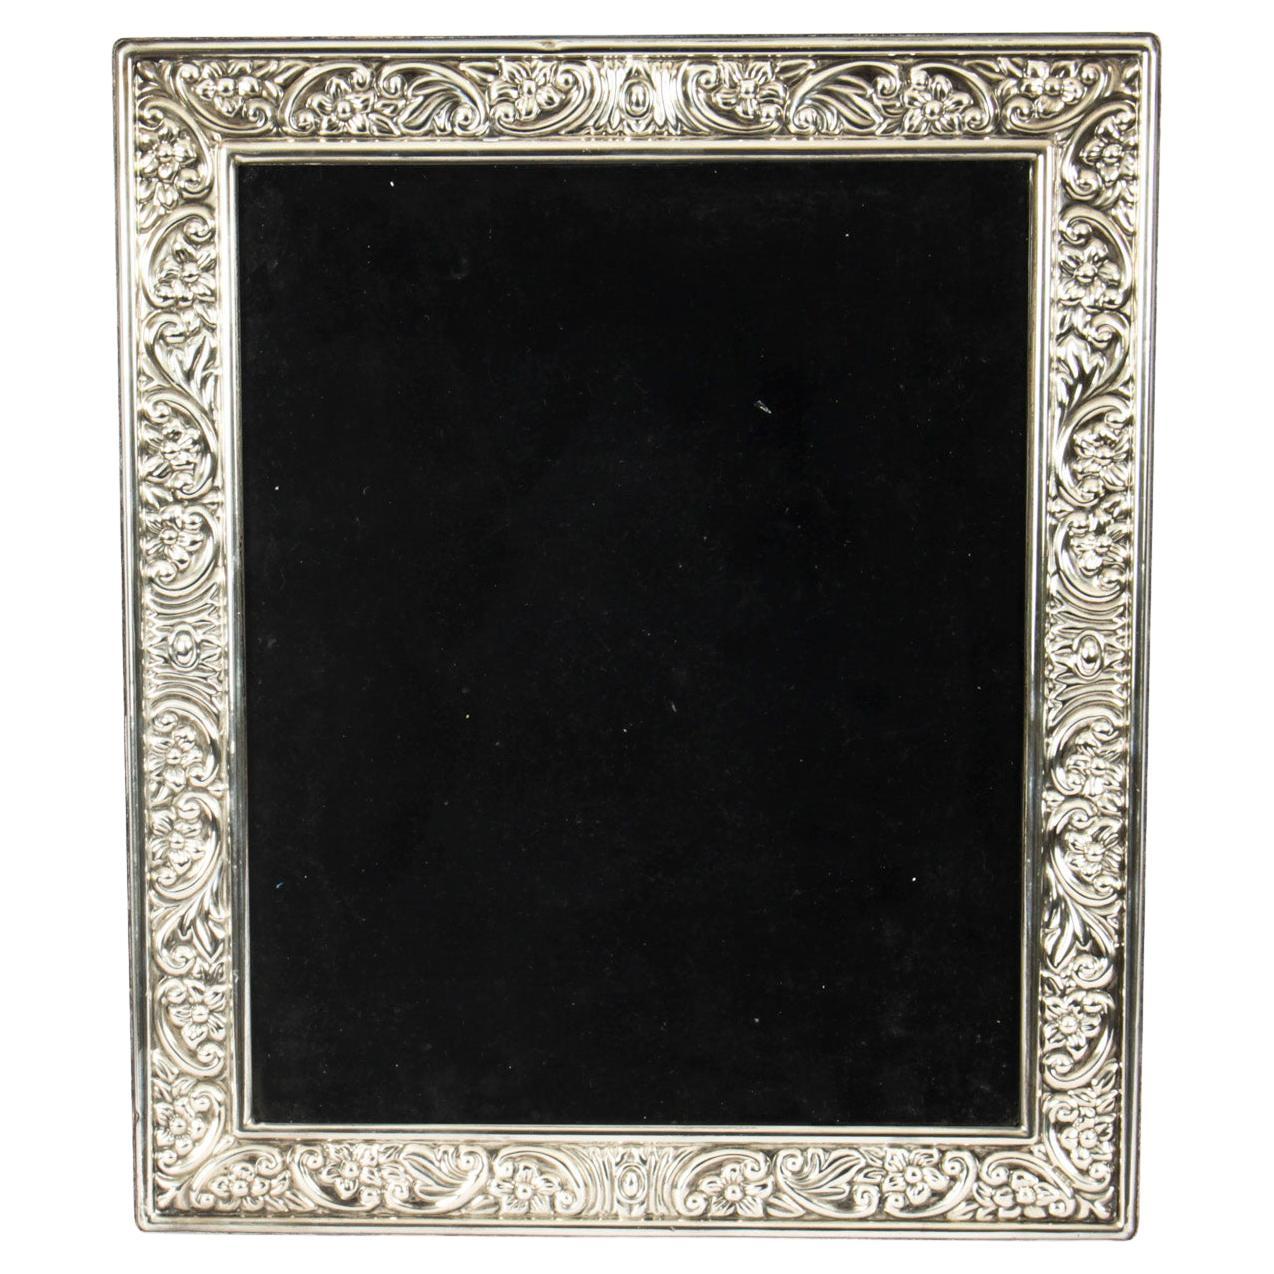 CARRS 10" x 8" Sterling Silver Photo Frame Bead Design Wood Back